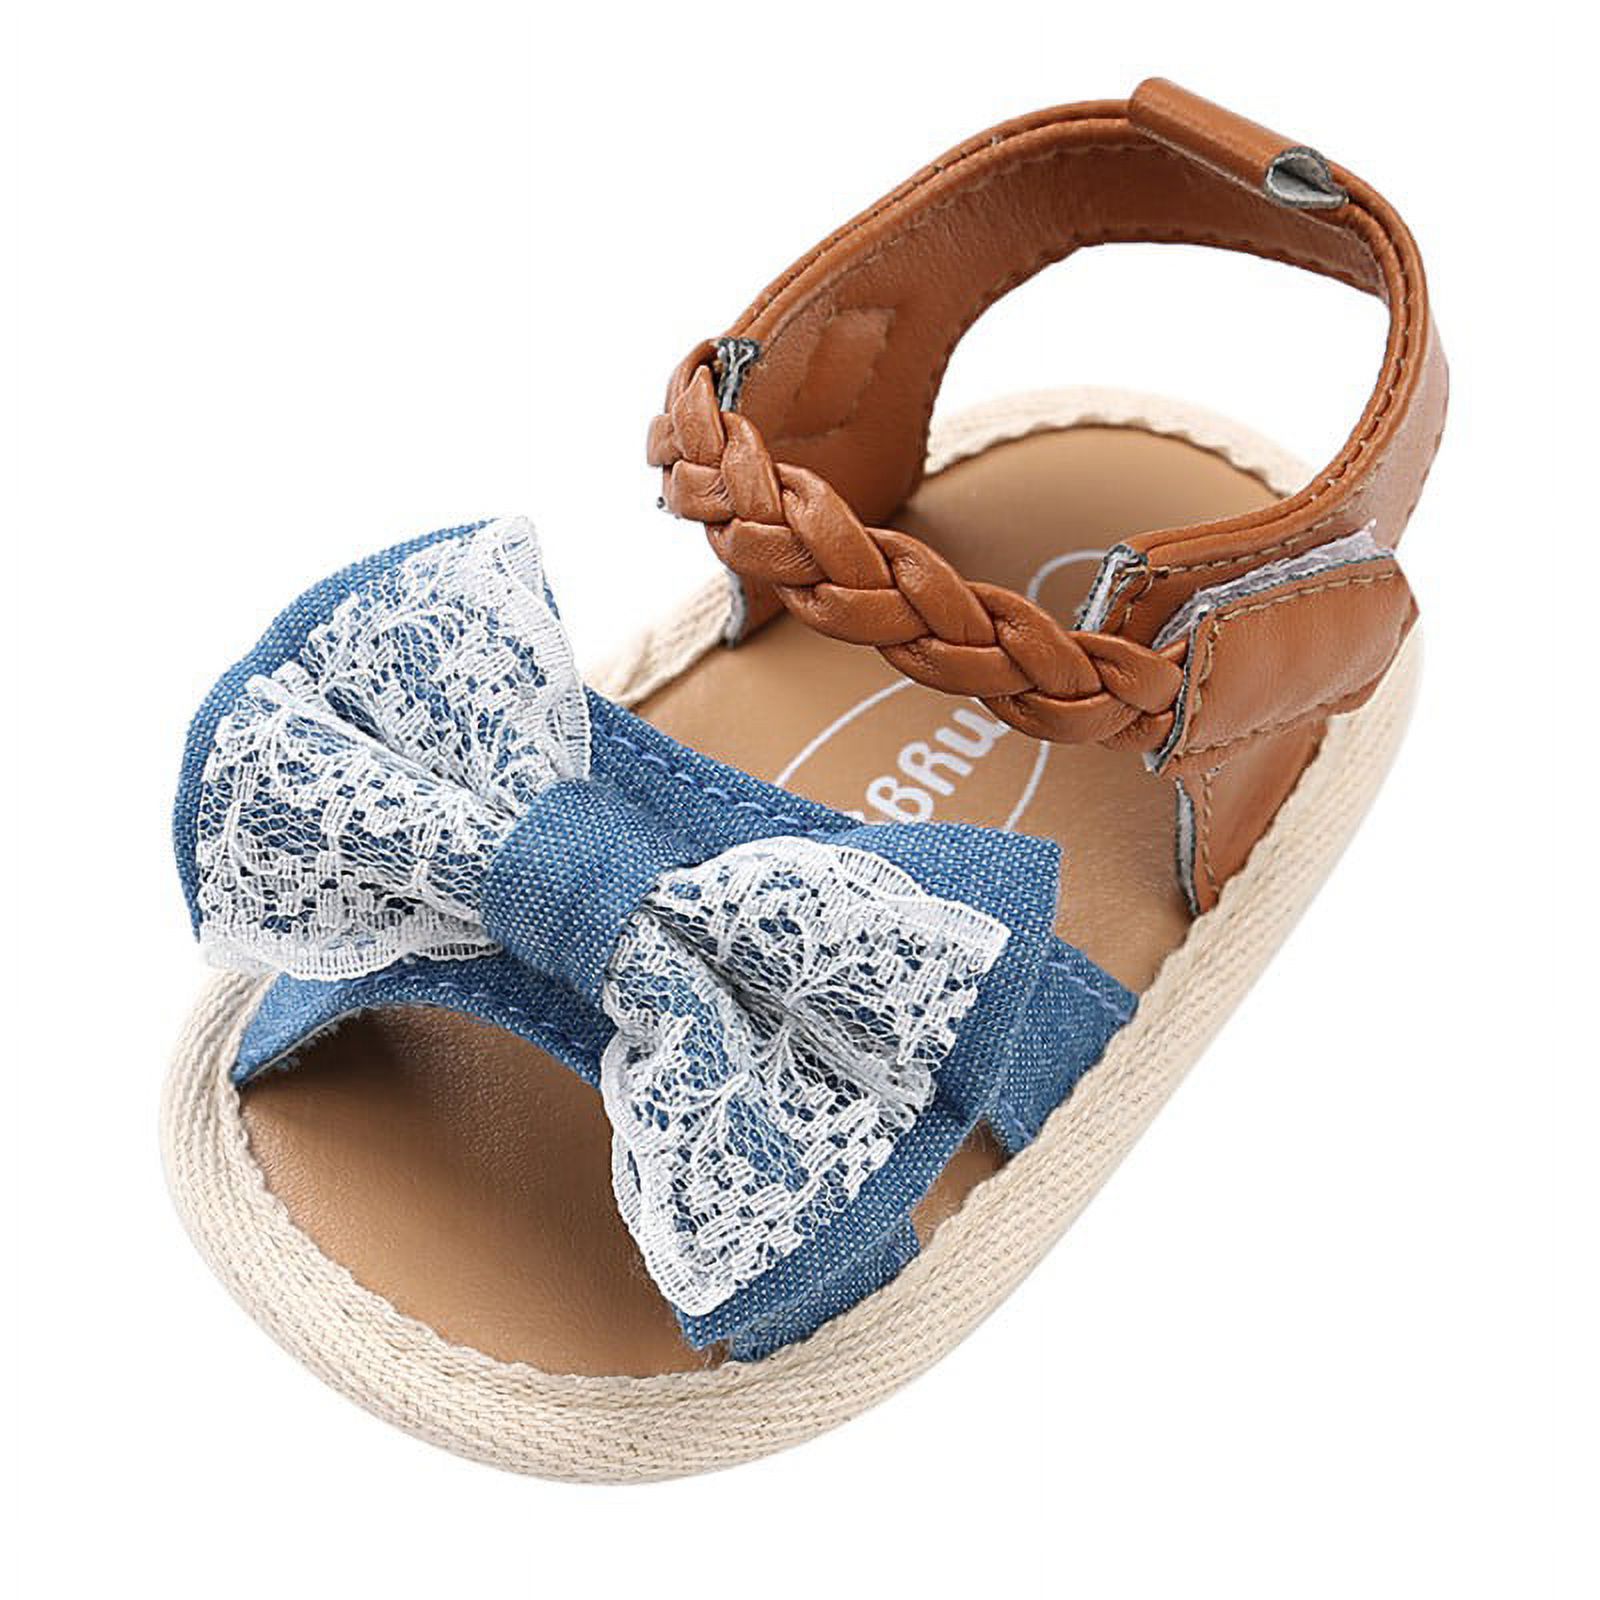 Baby Girls Sandals Summer Shoes Outdoor First Walker Toddler Girls Shoes for Summer - image 1 of 6